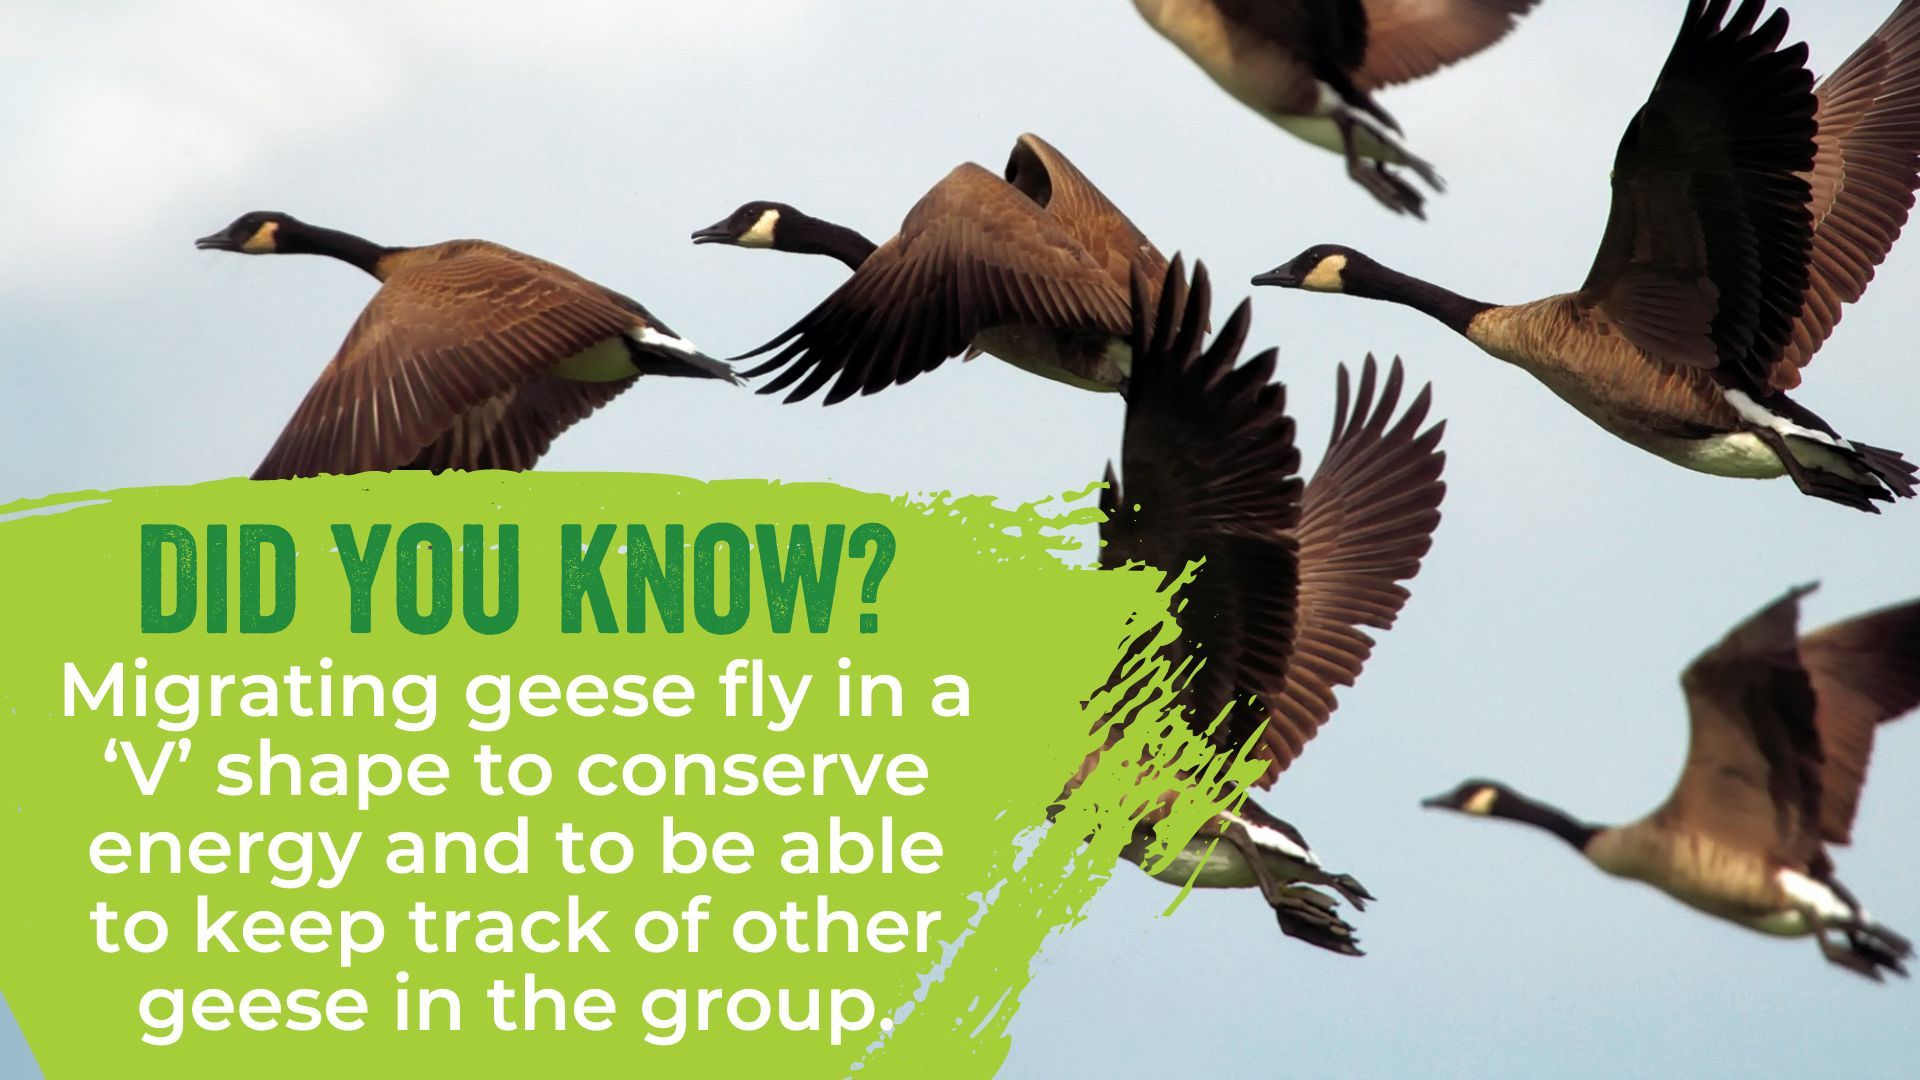 Migrating geese fly in a ‘V’ shape to conserve energy and to be able to keep track of other geese in the group.